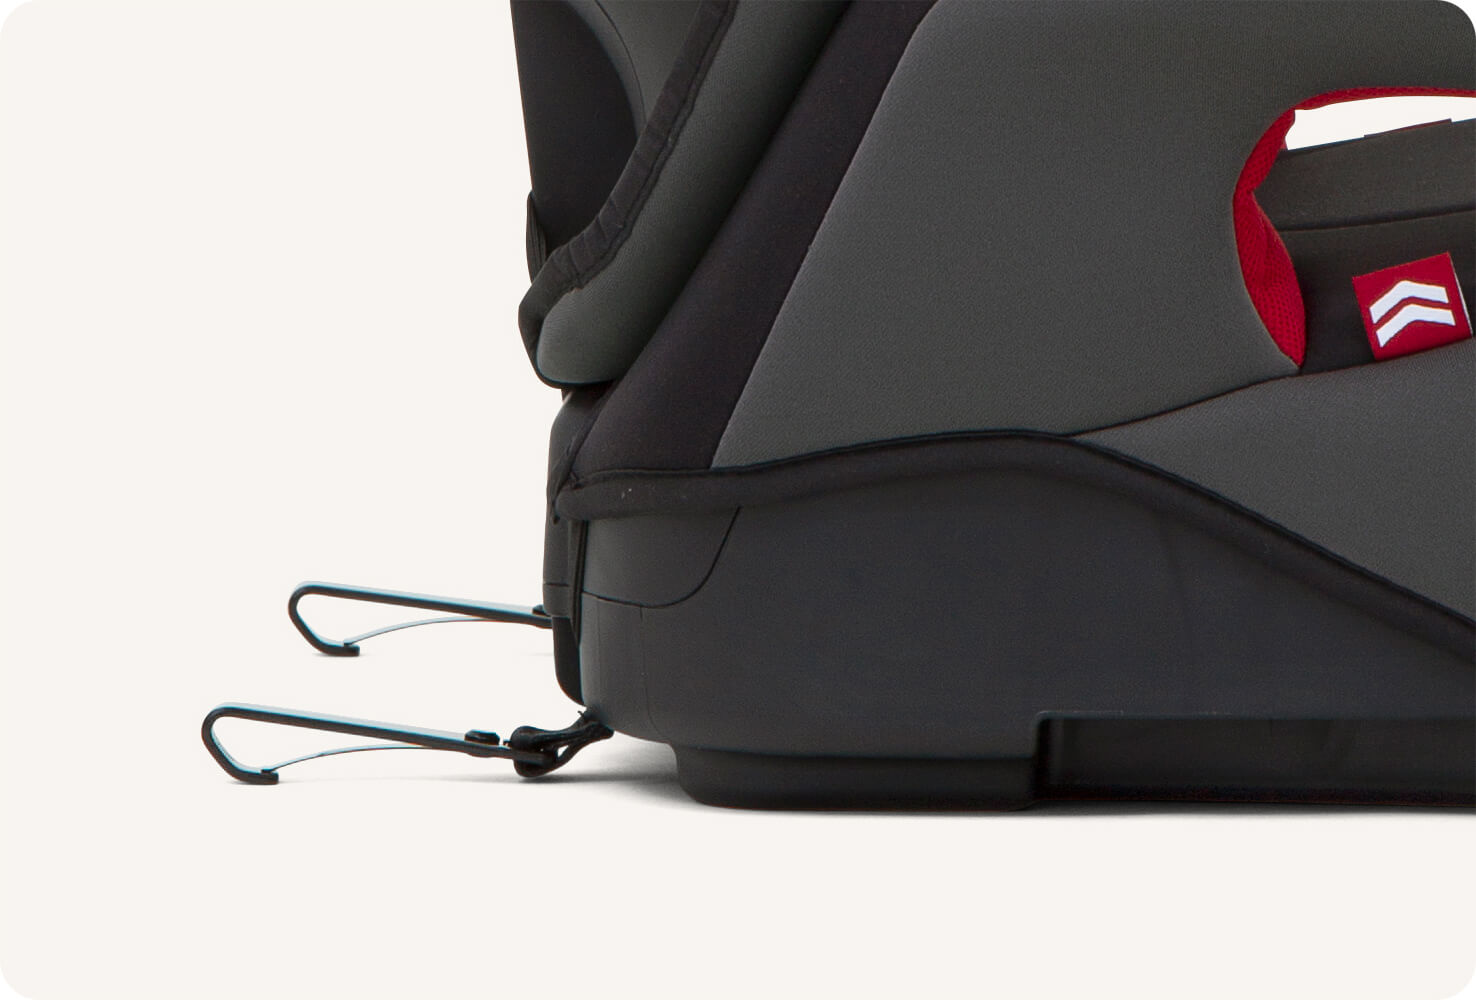  Zoomed in view of the isofix on the Joie trillo booster seat.